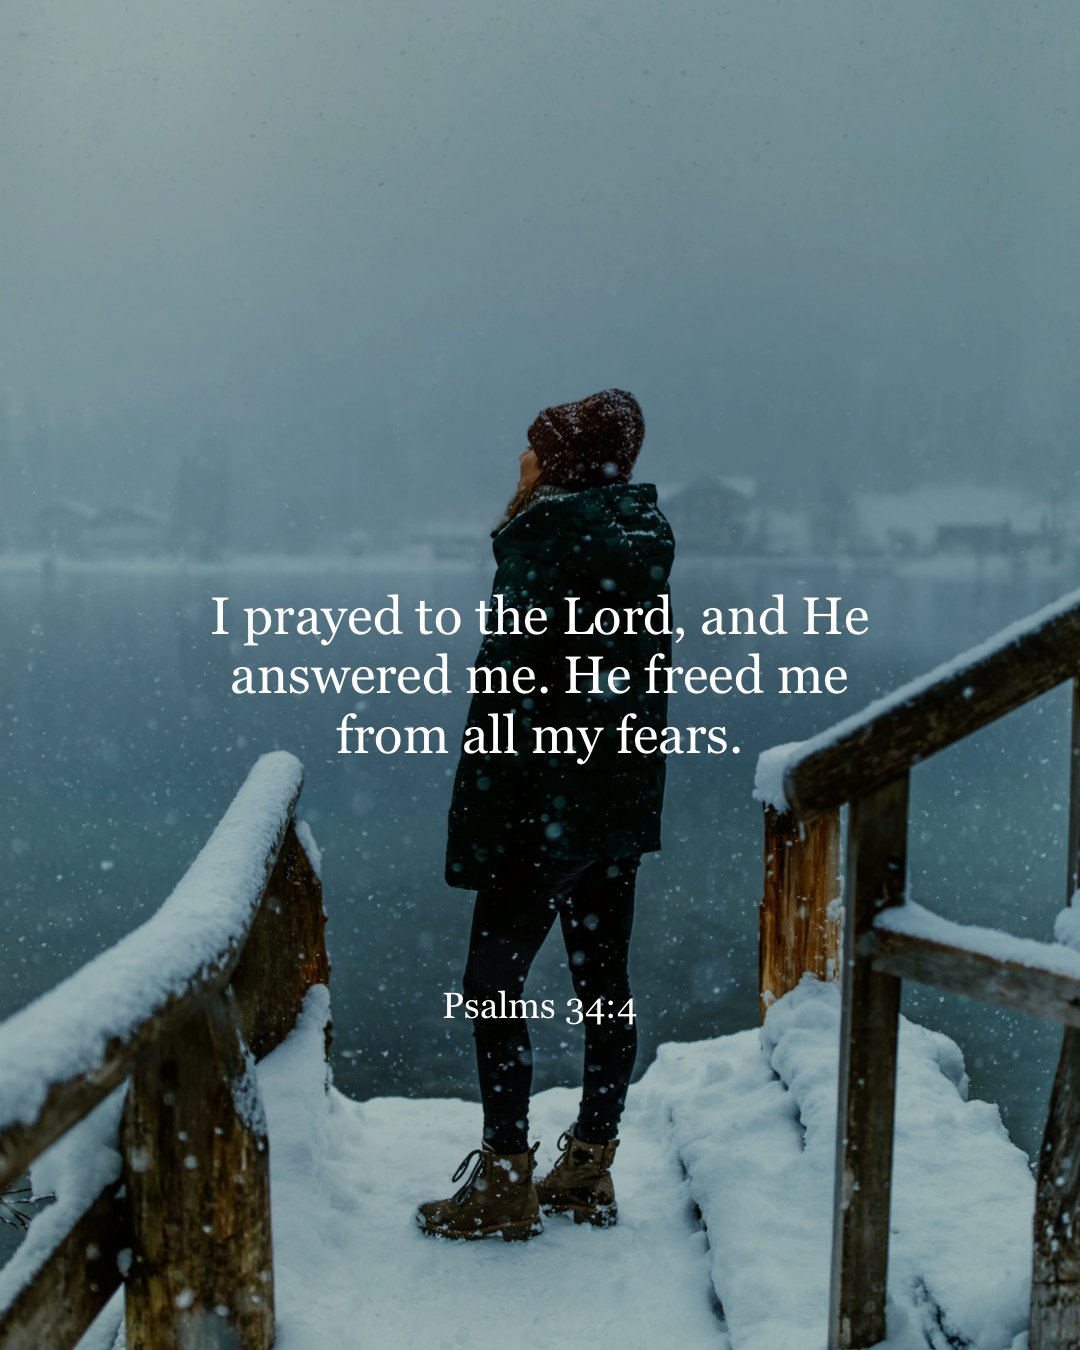 Iprayed to the Lord, and He answered me. He freed me from all my fears. Psalms 34.4